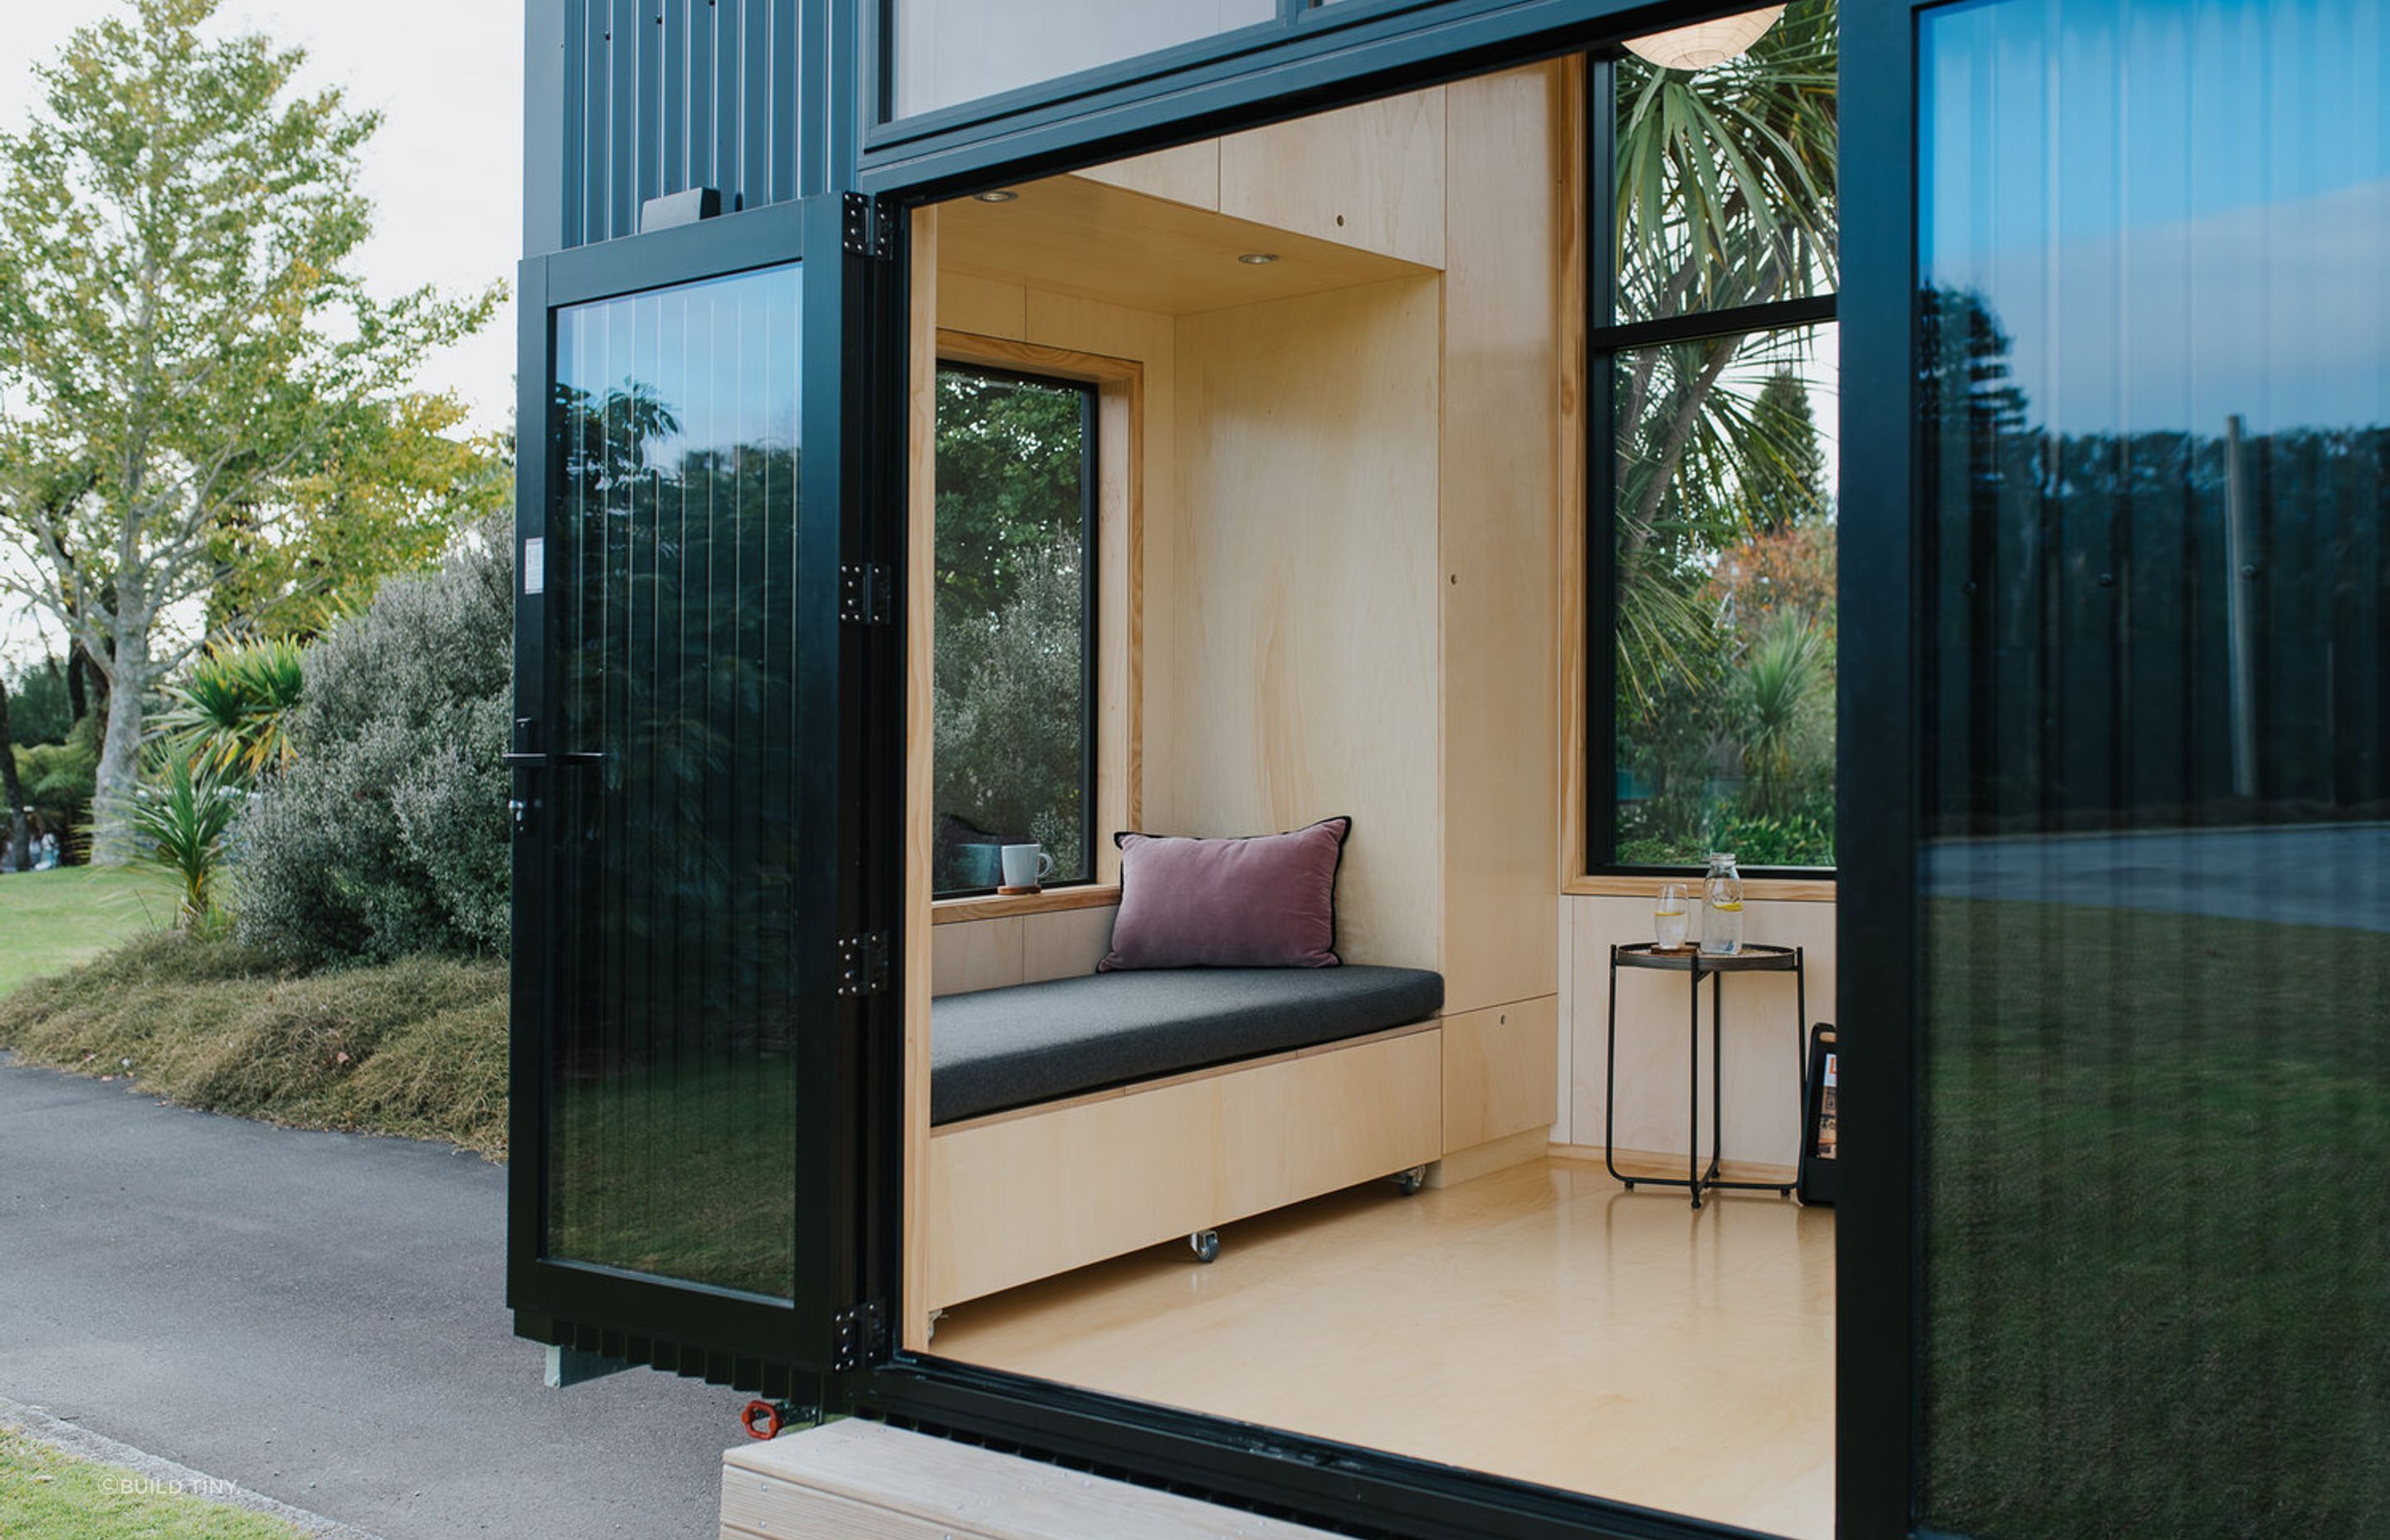 The windows and doors have been positioned for maximum light and flexibility, and every seat, stair and alcove doubles as storage. The window seat incorporates a pull-out day bed.